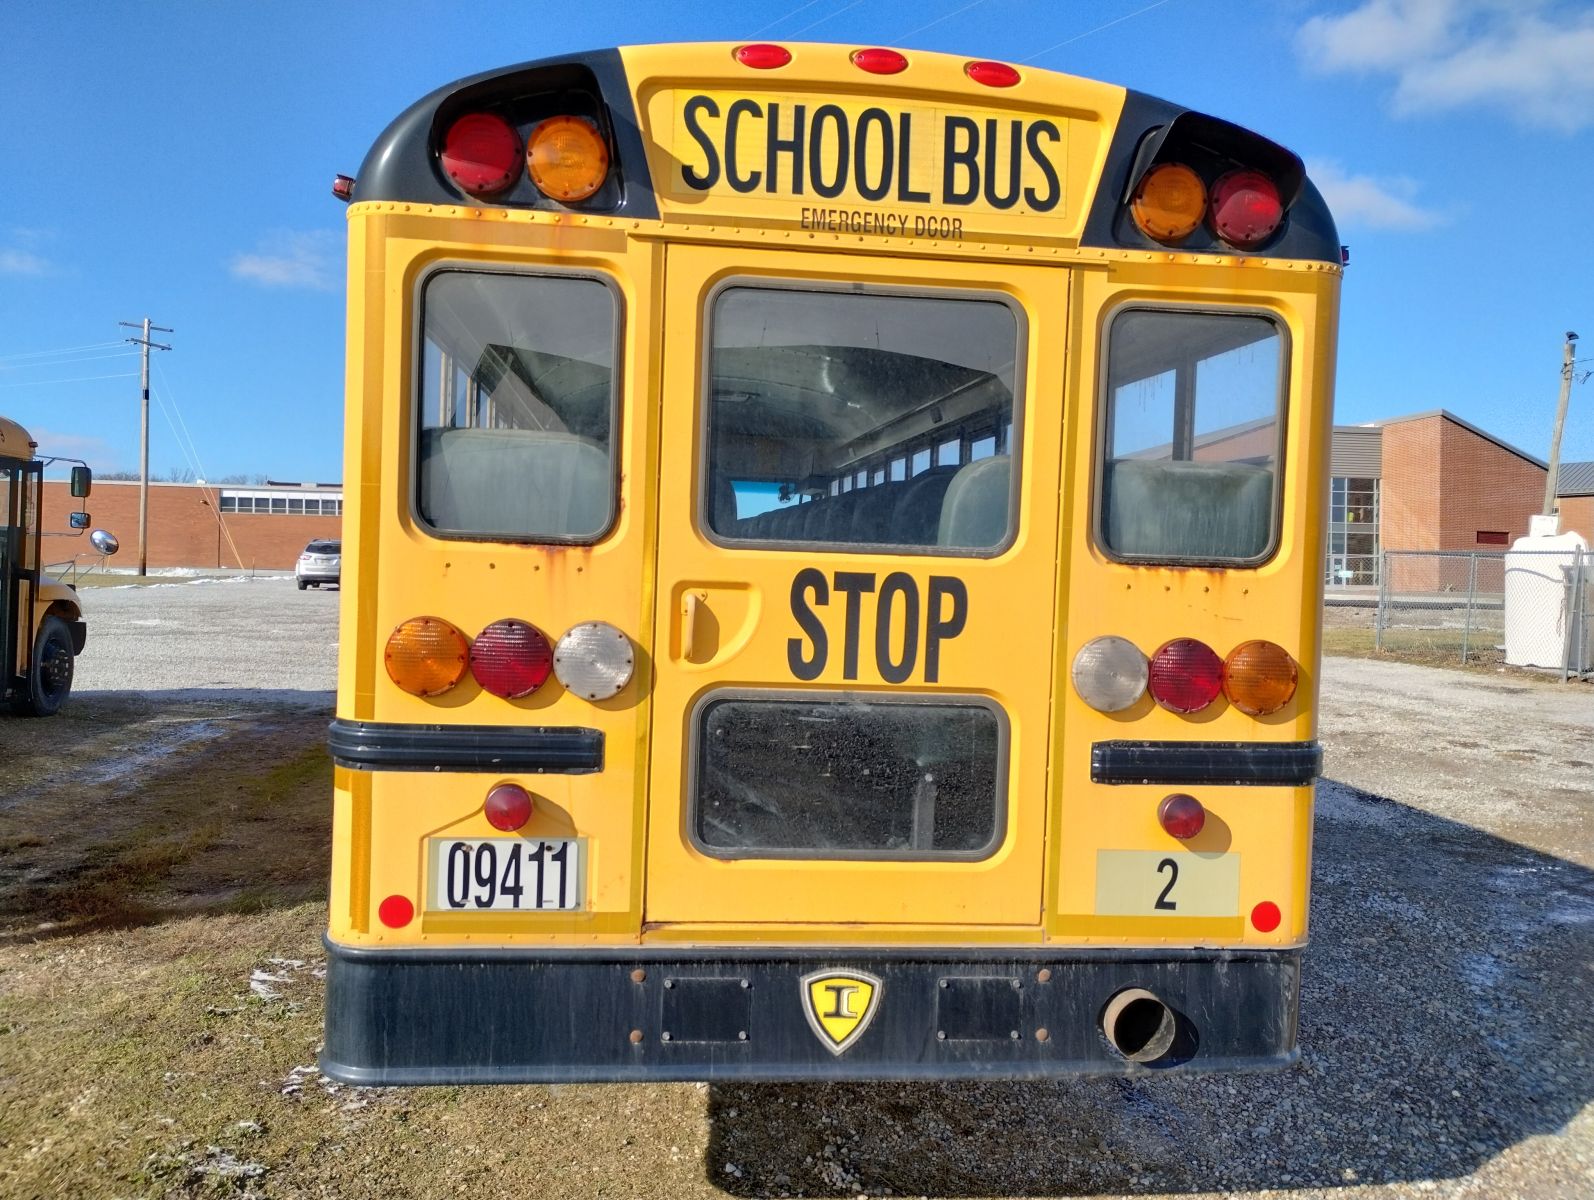 An image of the rear of a school bus.